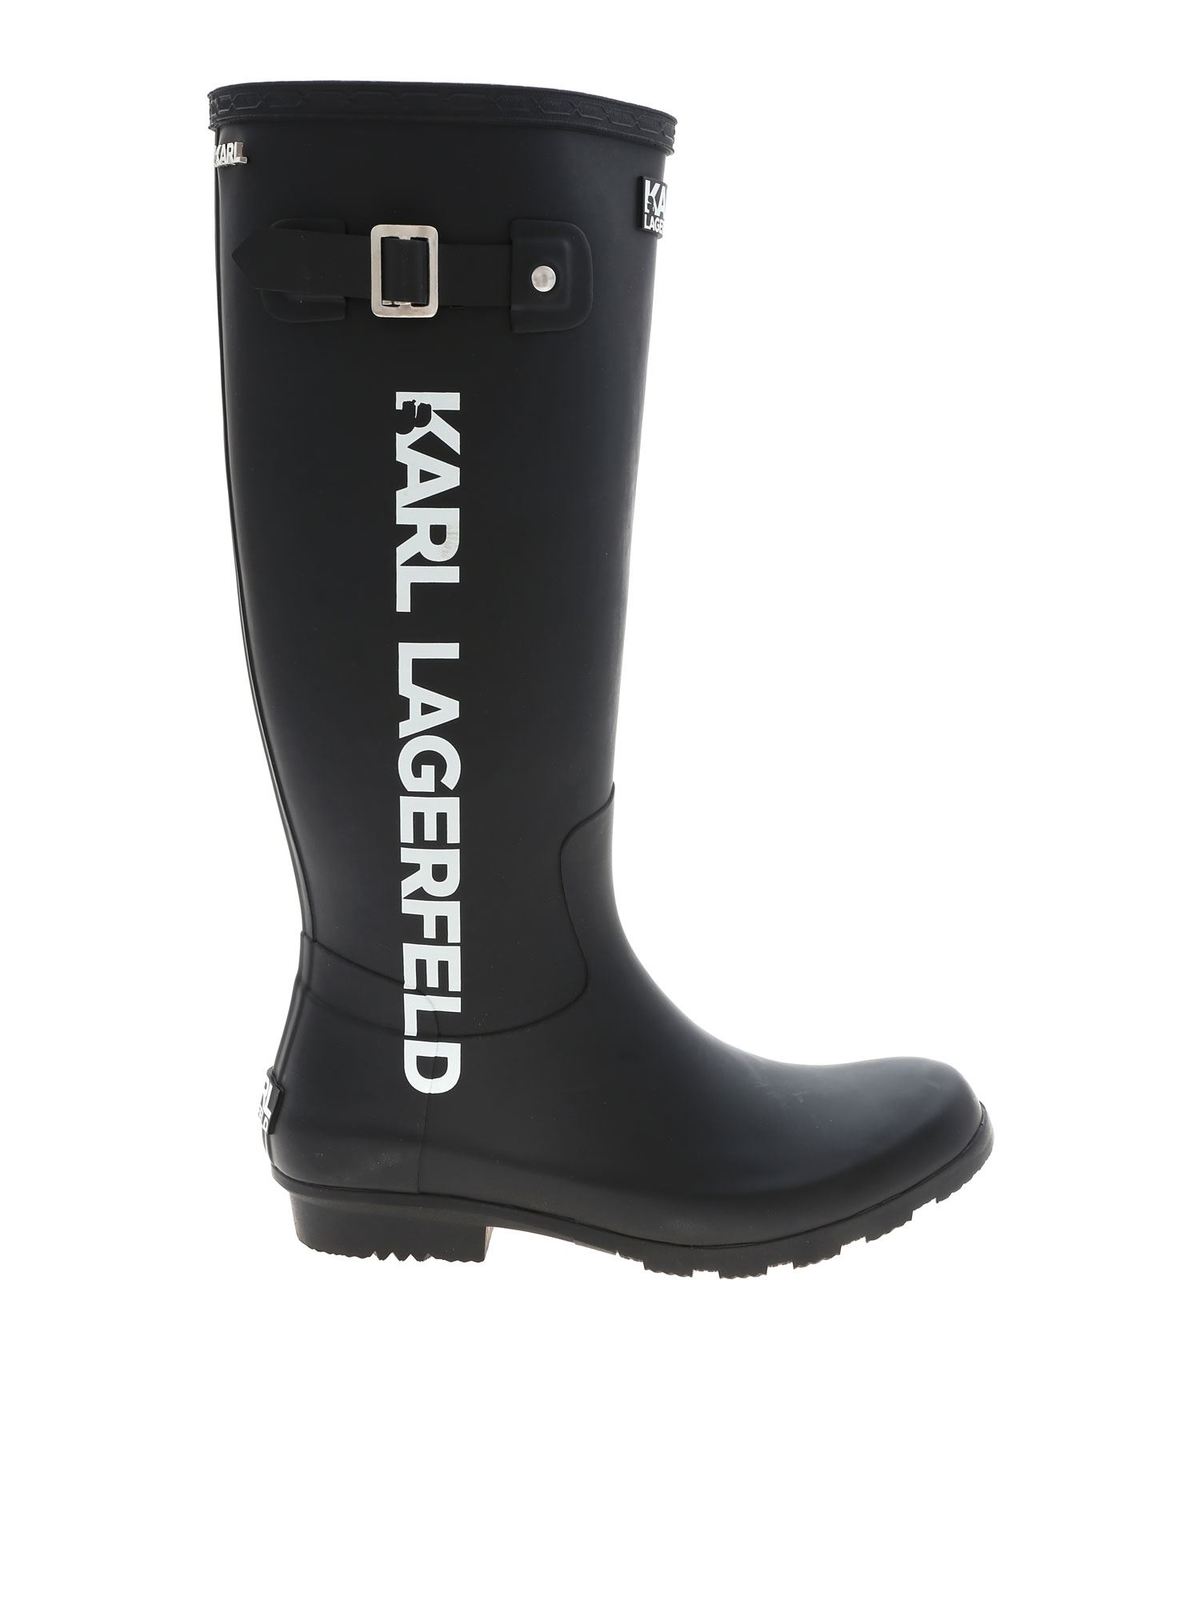 lagerfeld boots